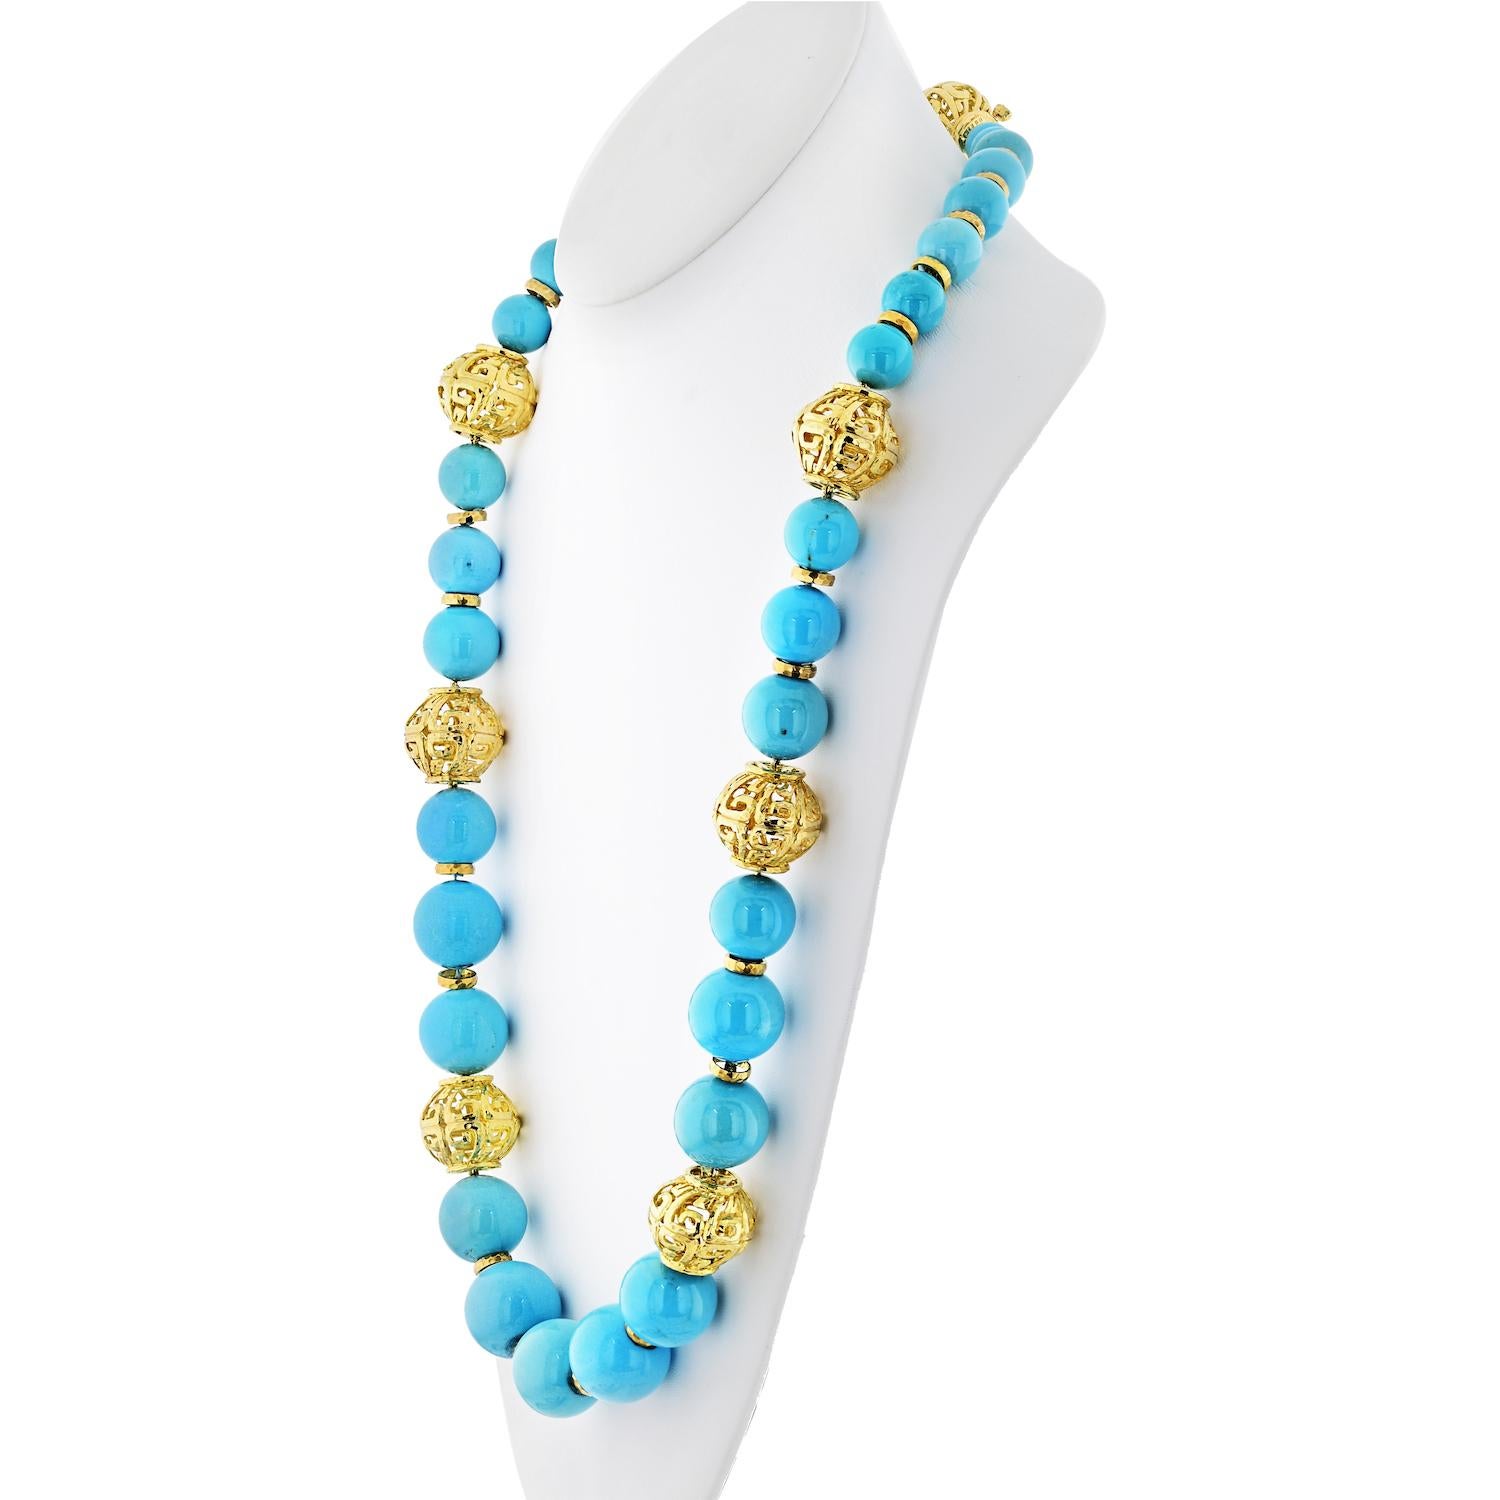 David Webb Turquoise Platinum & 18K Yellow Gold Large Bead Strand Necklace In Excellent Condition For Sale In New York, NY